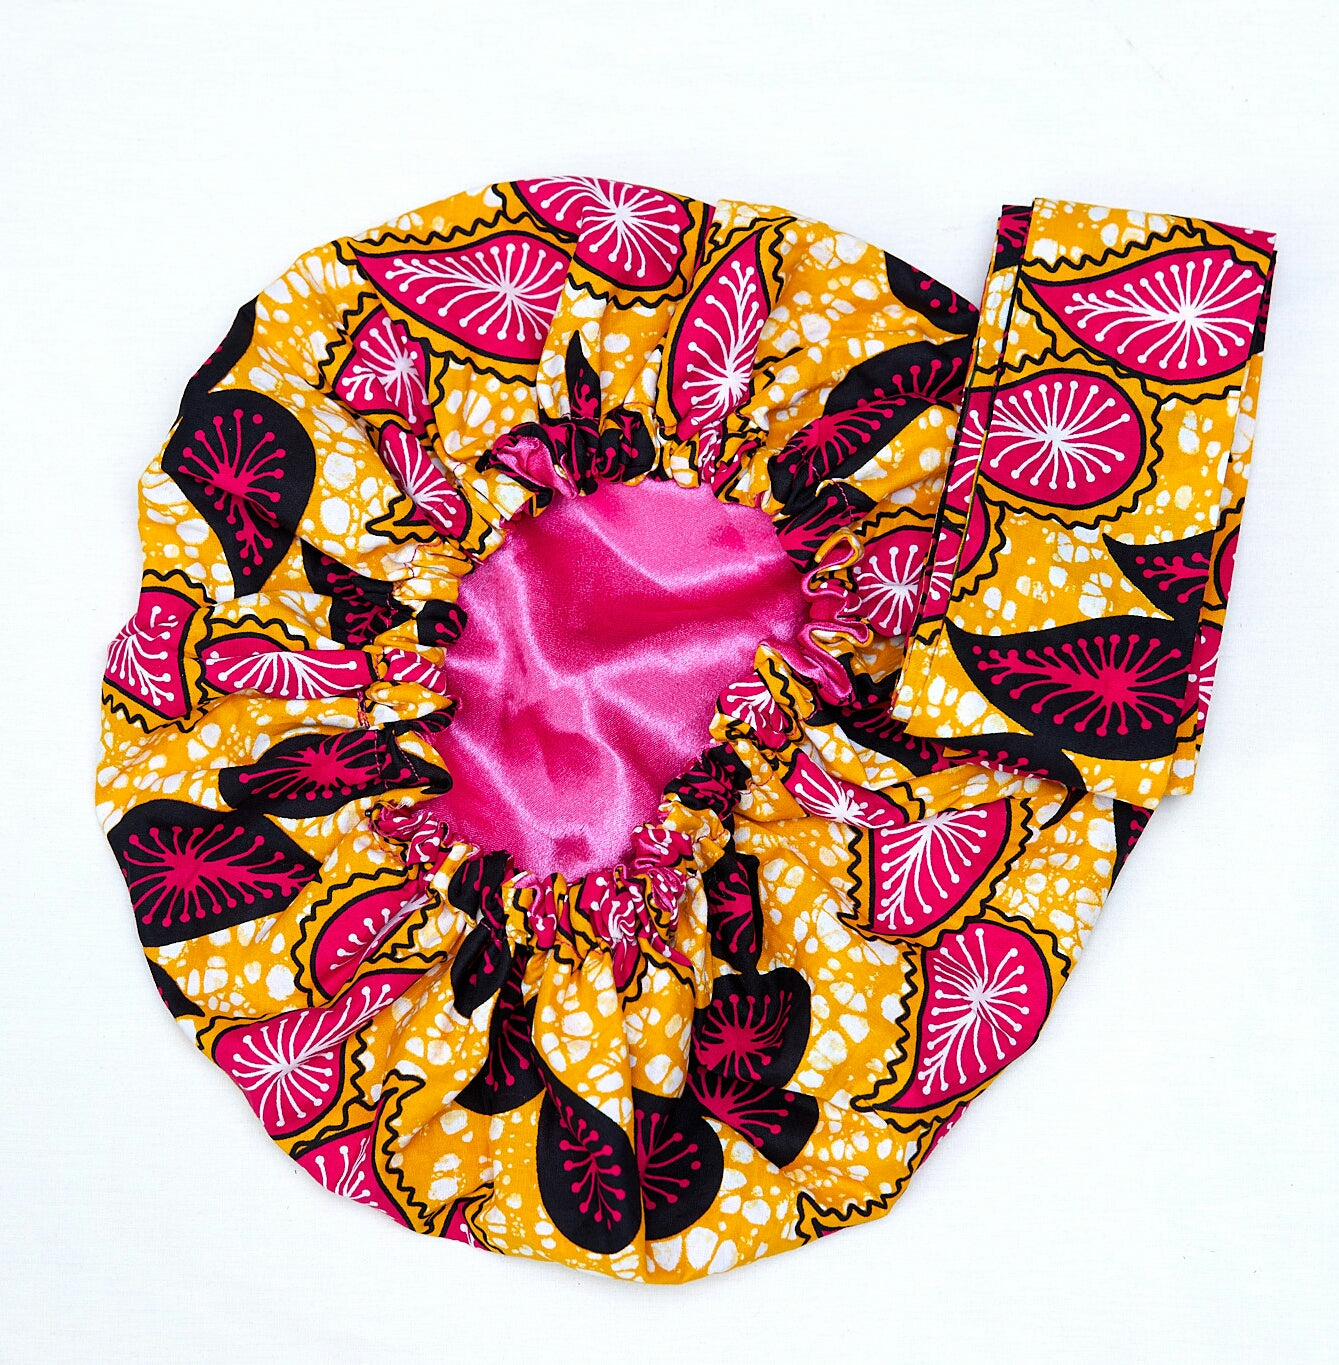 Ankara Wax Print Made of Gold, Pink and Black Blended Beautiful Colours And Pattern, Hand Made Elastic Silklined Bonnet With Band